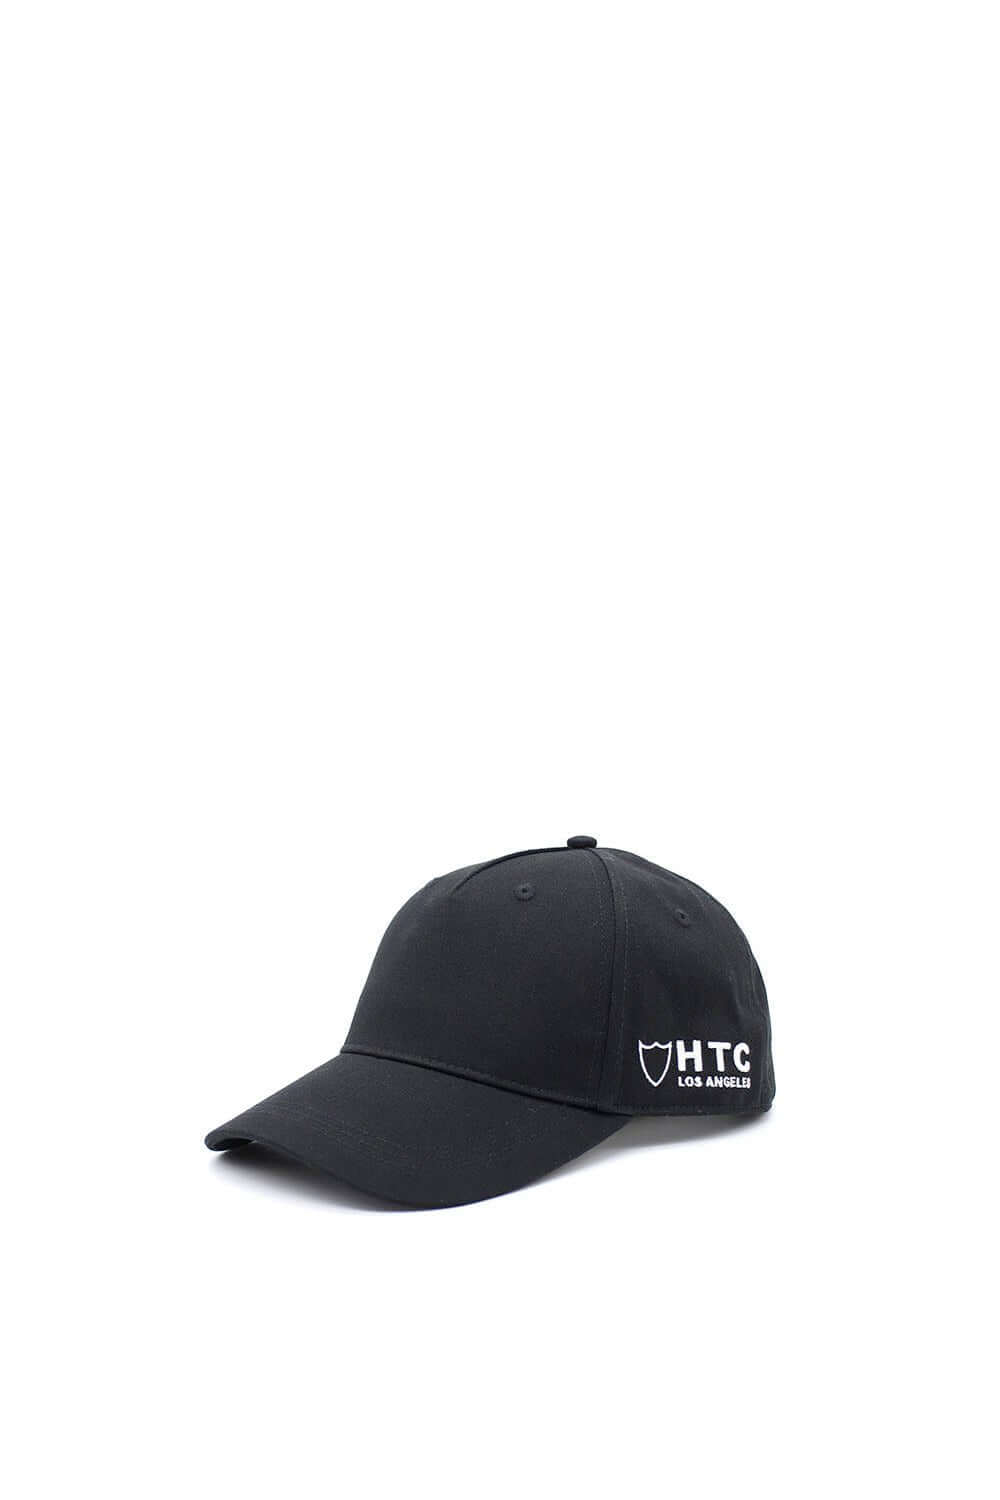 HTC SIDE CAP Black baseball cap , round crown with eyelets , htc logo embroidered on the side, adjustable strap on the back. One size fits all. 100% cotton. HTC LOS ANGELES